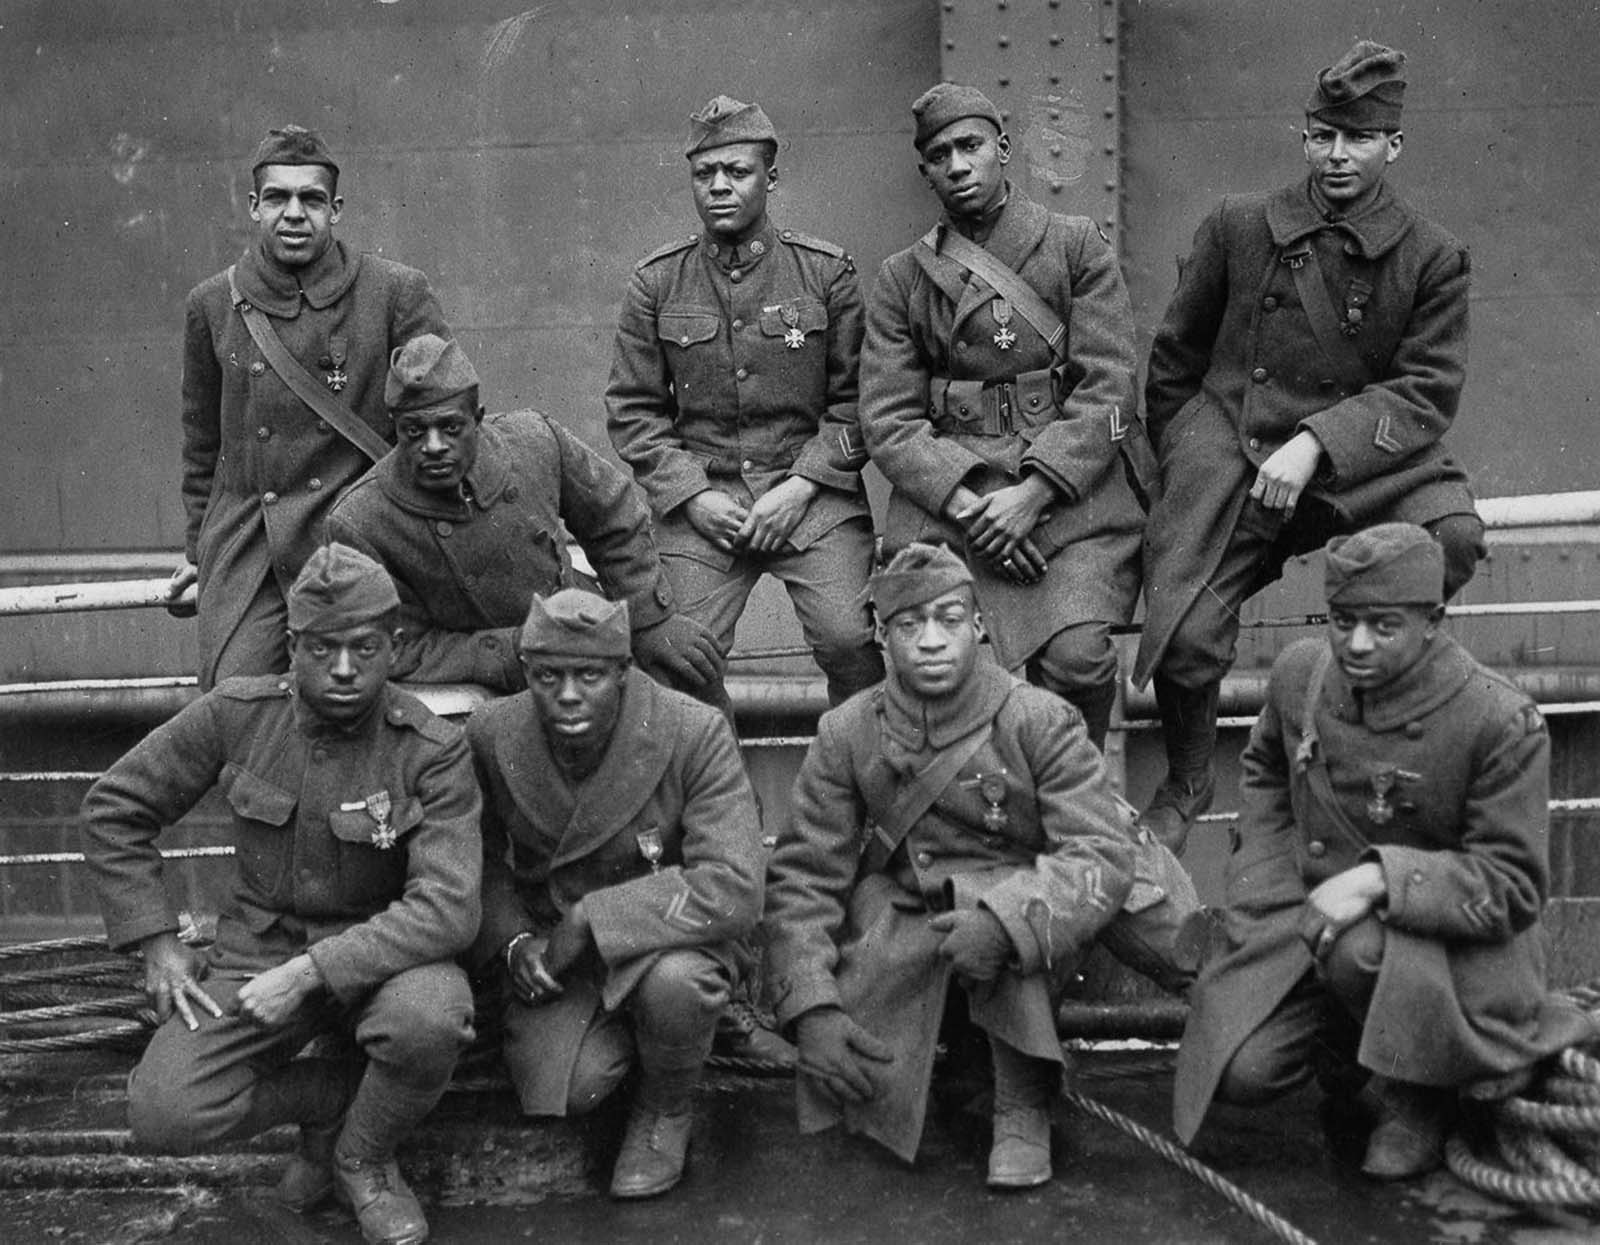 Soldiers of the 369th wearing the Cross of War medal pose for a photo on their trip back to New York.